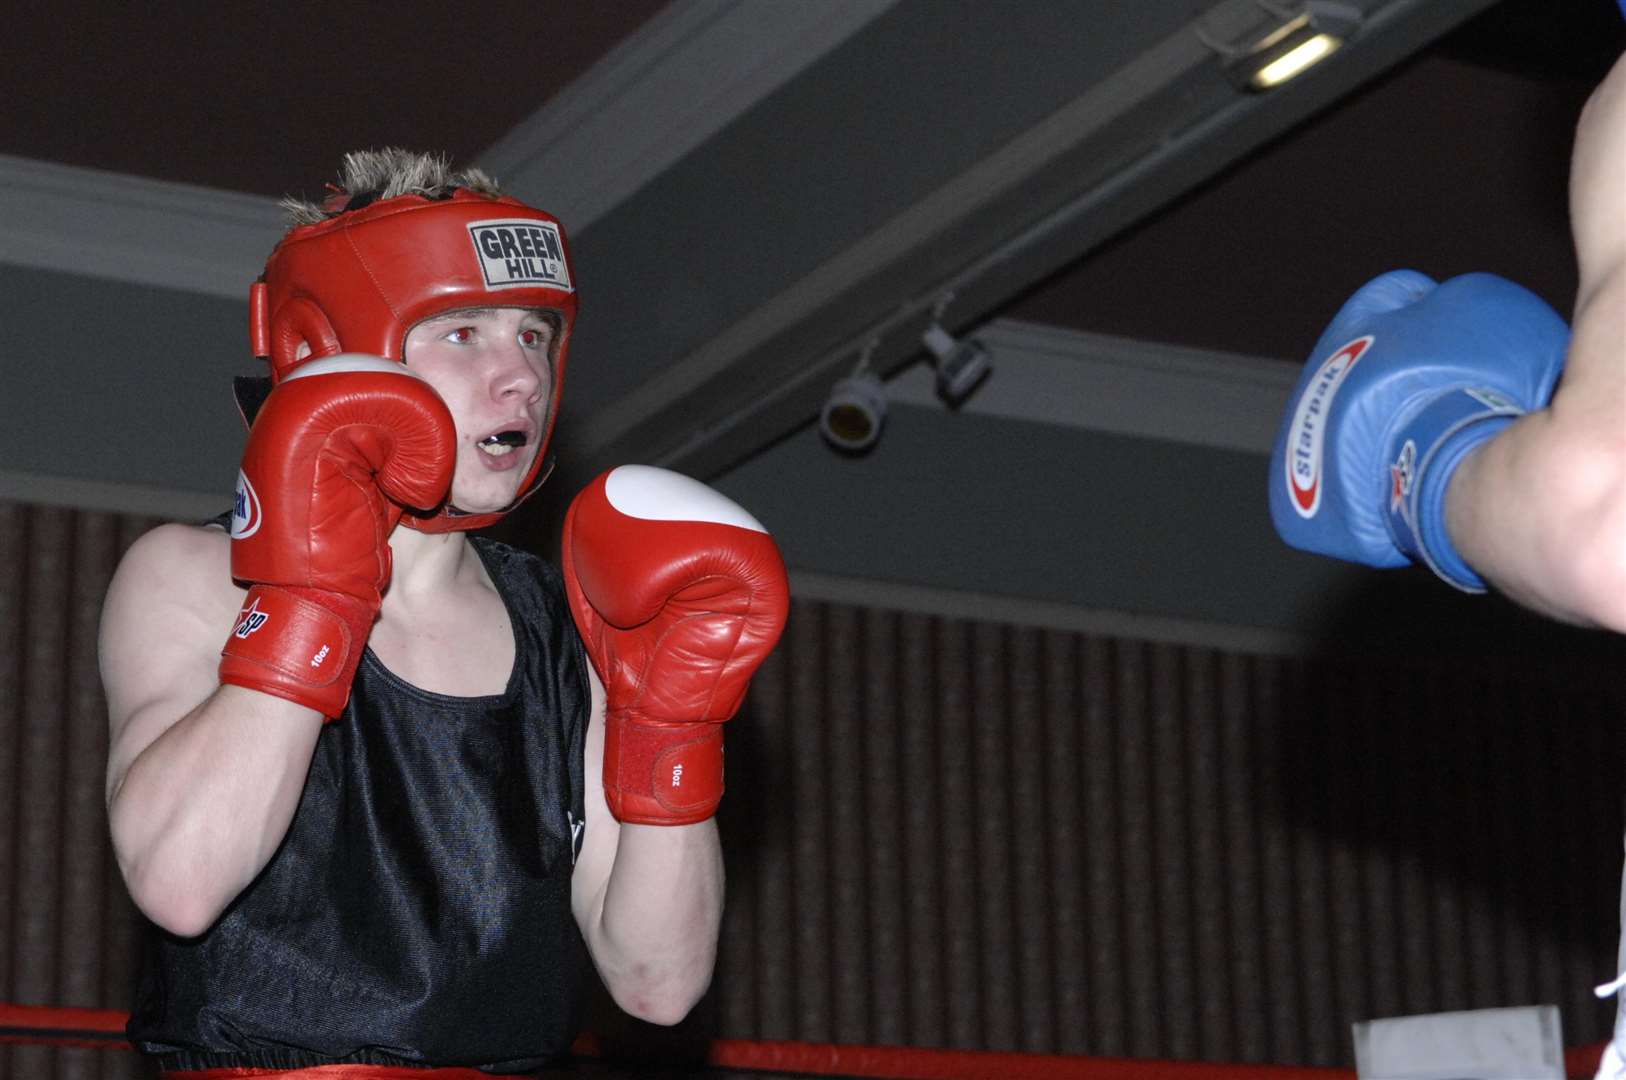 Jordan Lupton was a keen boxer in his youth